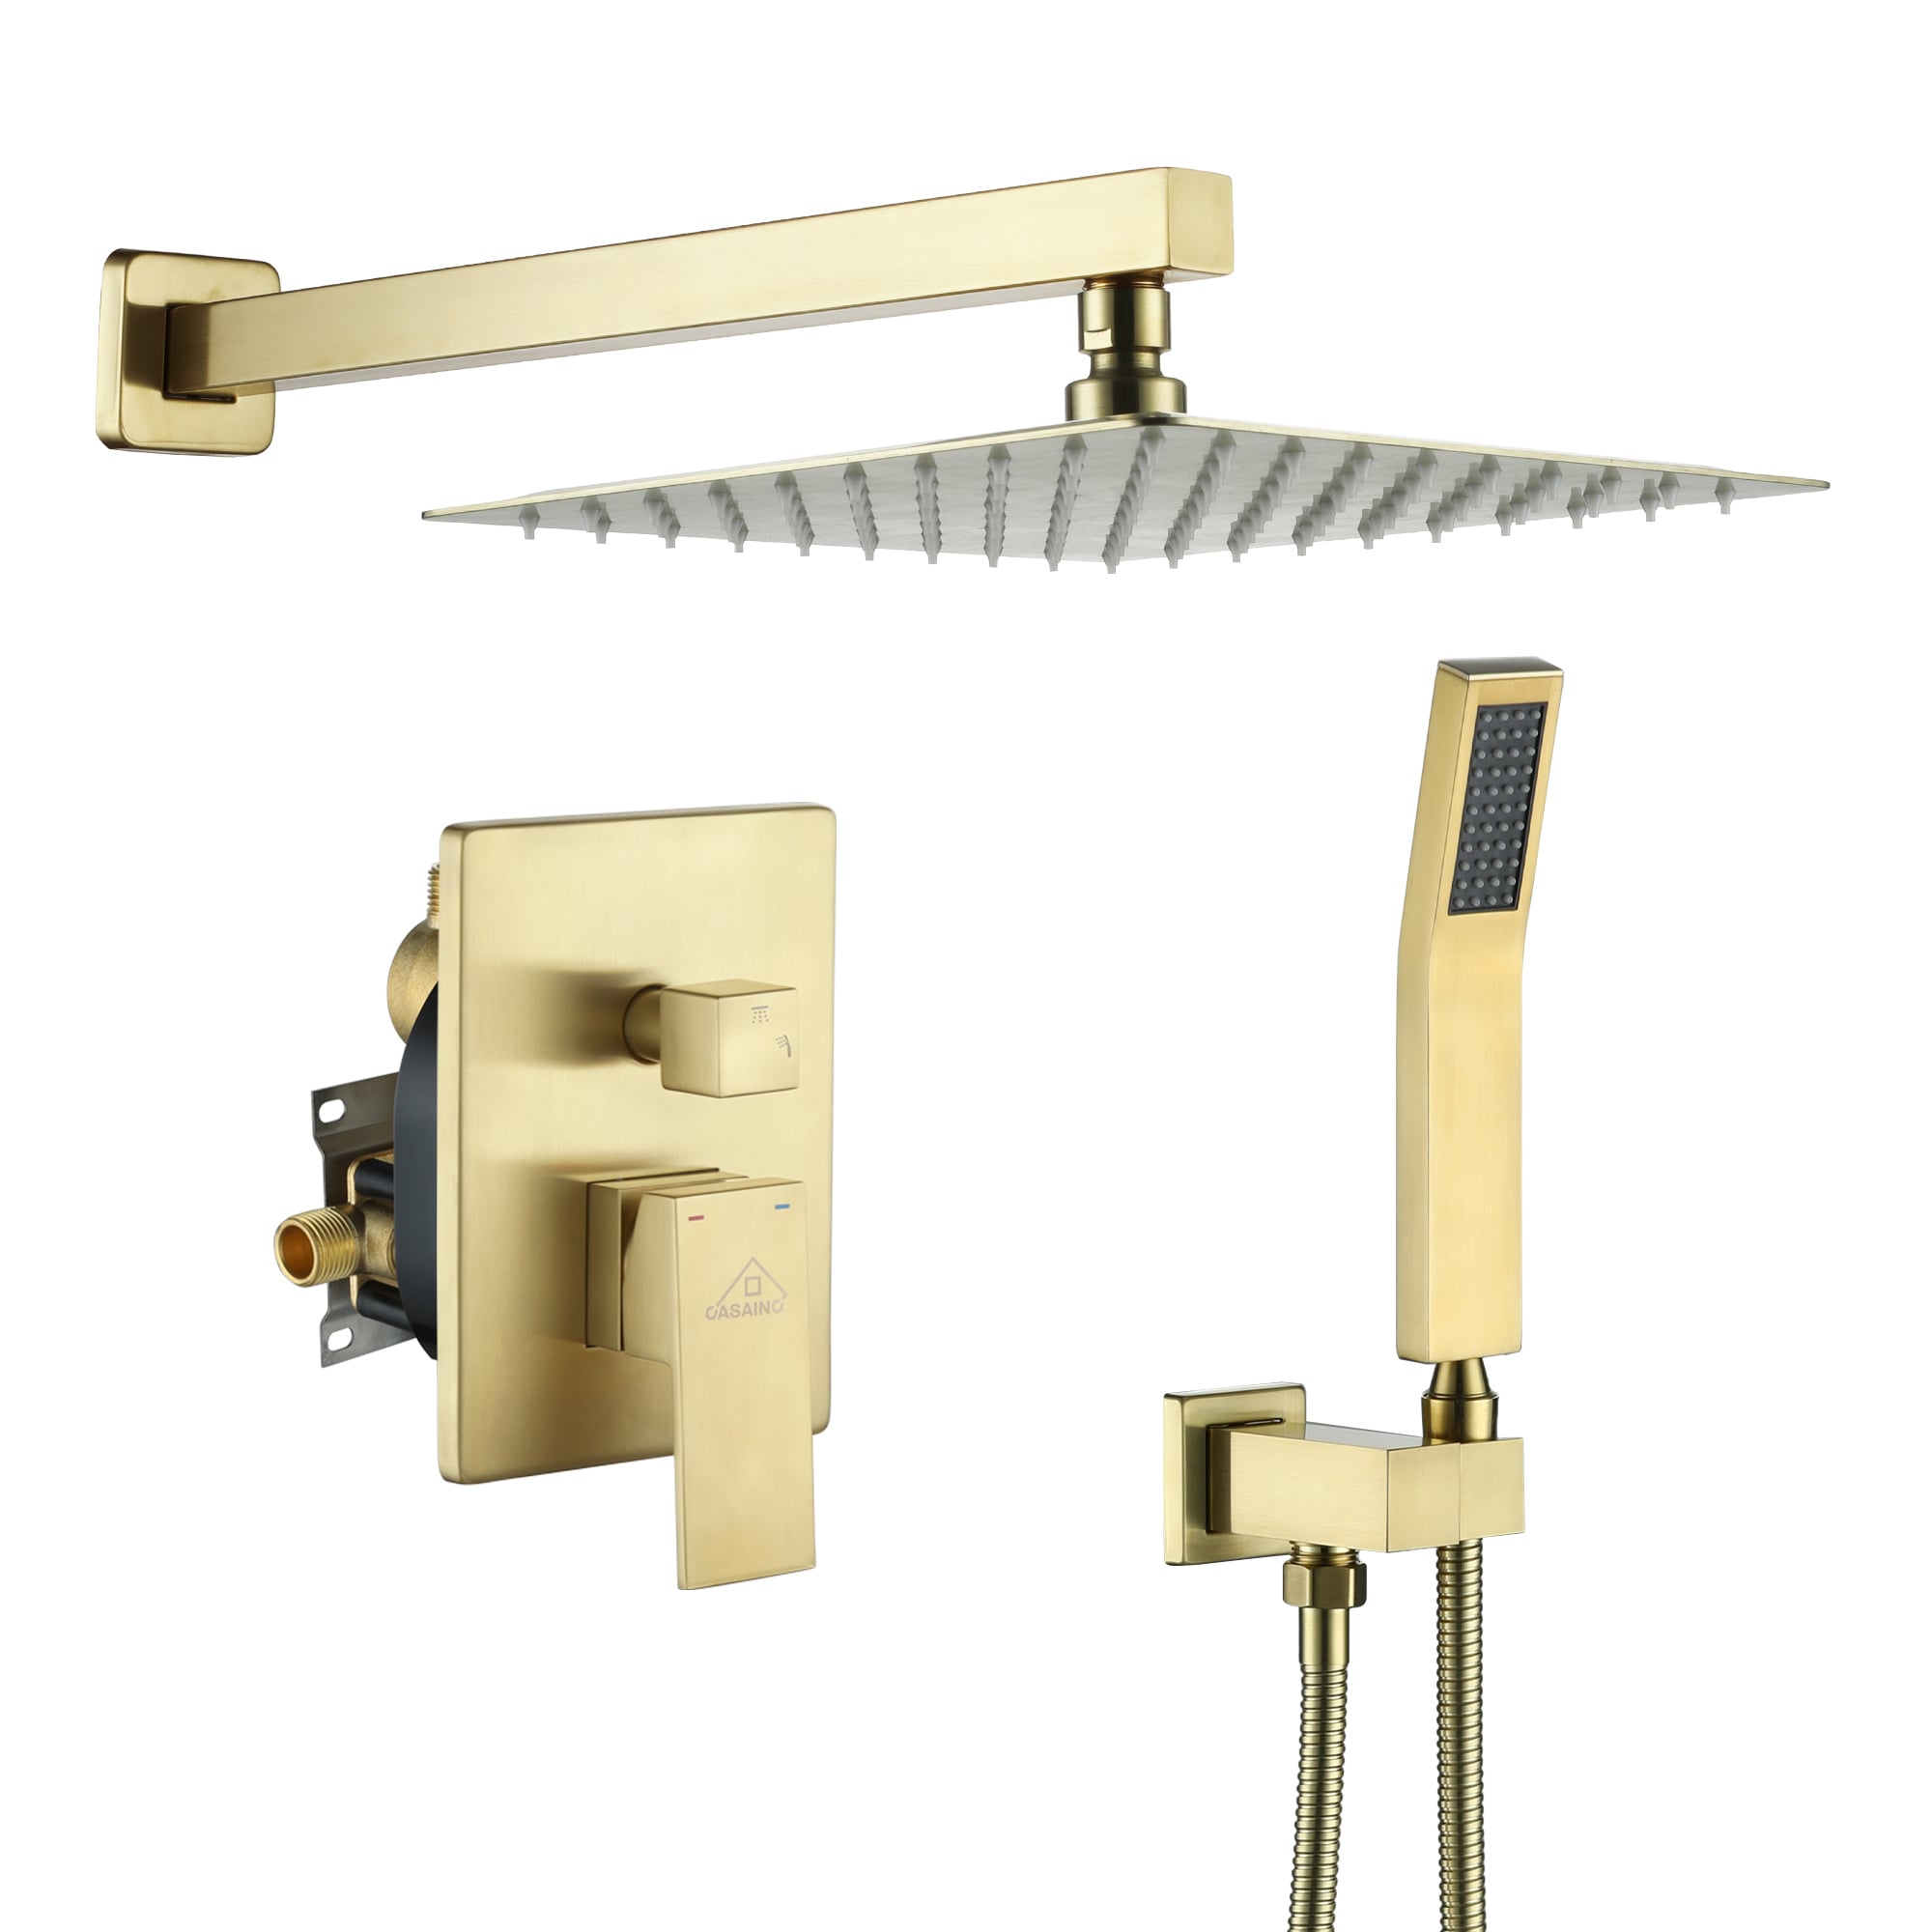 CASAINC Brushed Gold Built-In Shower Faucet System with 2-way Diverter Pressure-balanced Valve Included